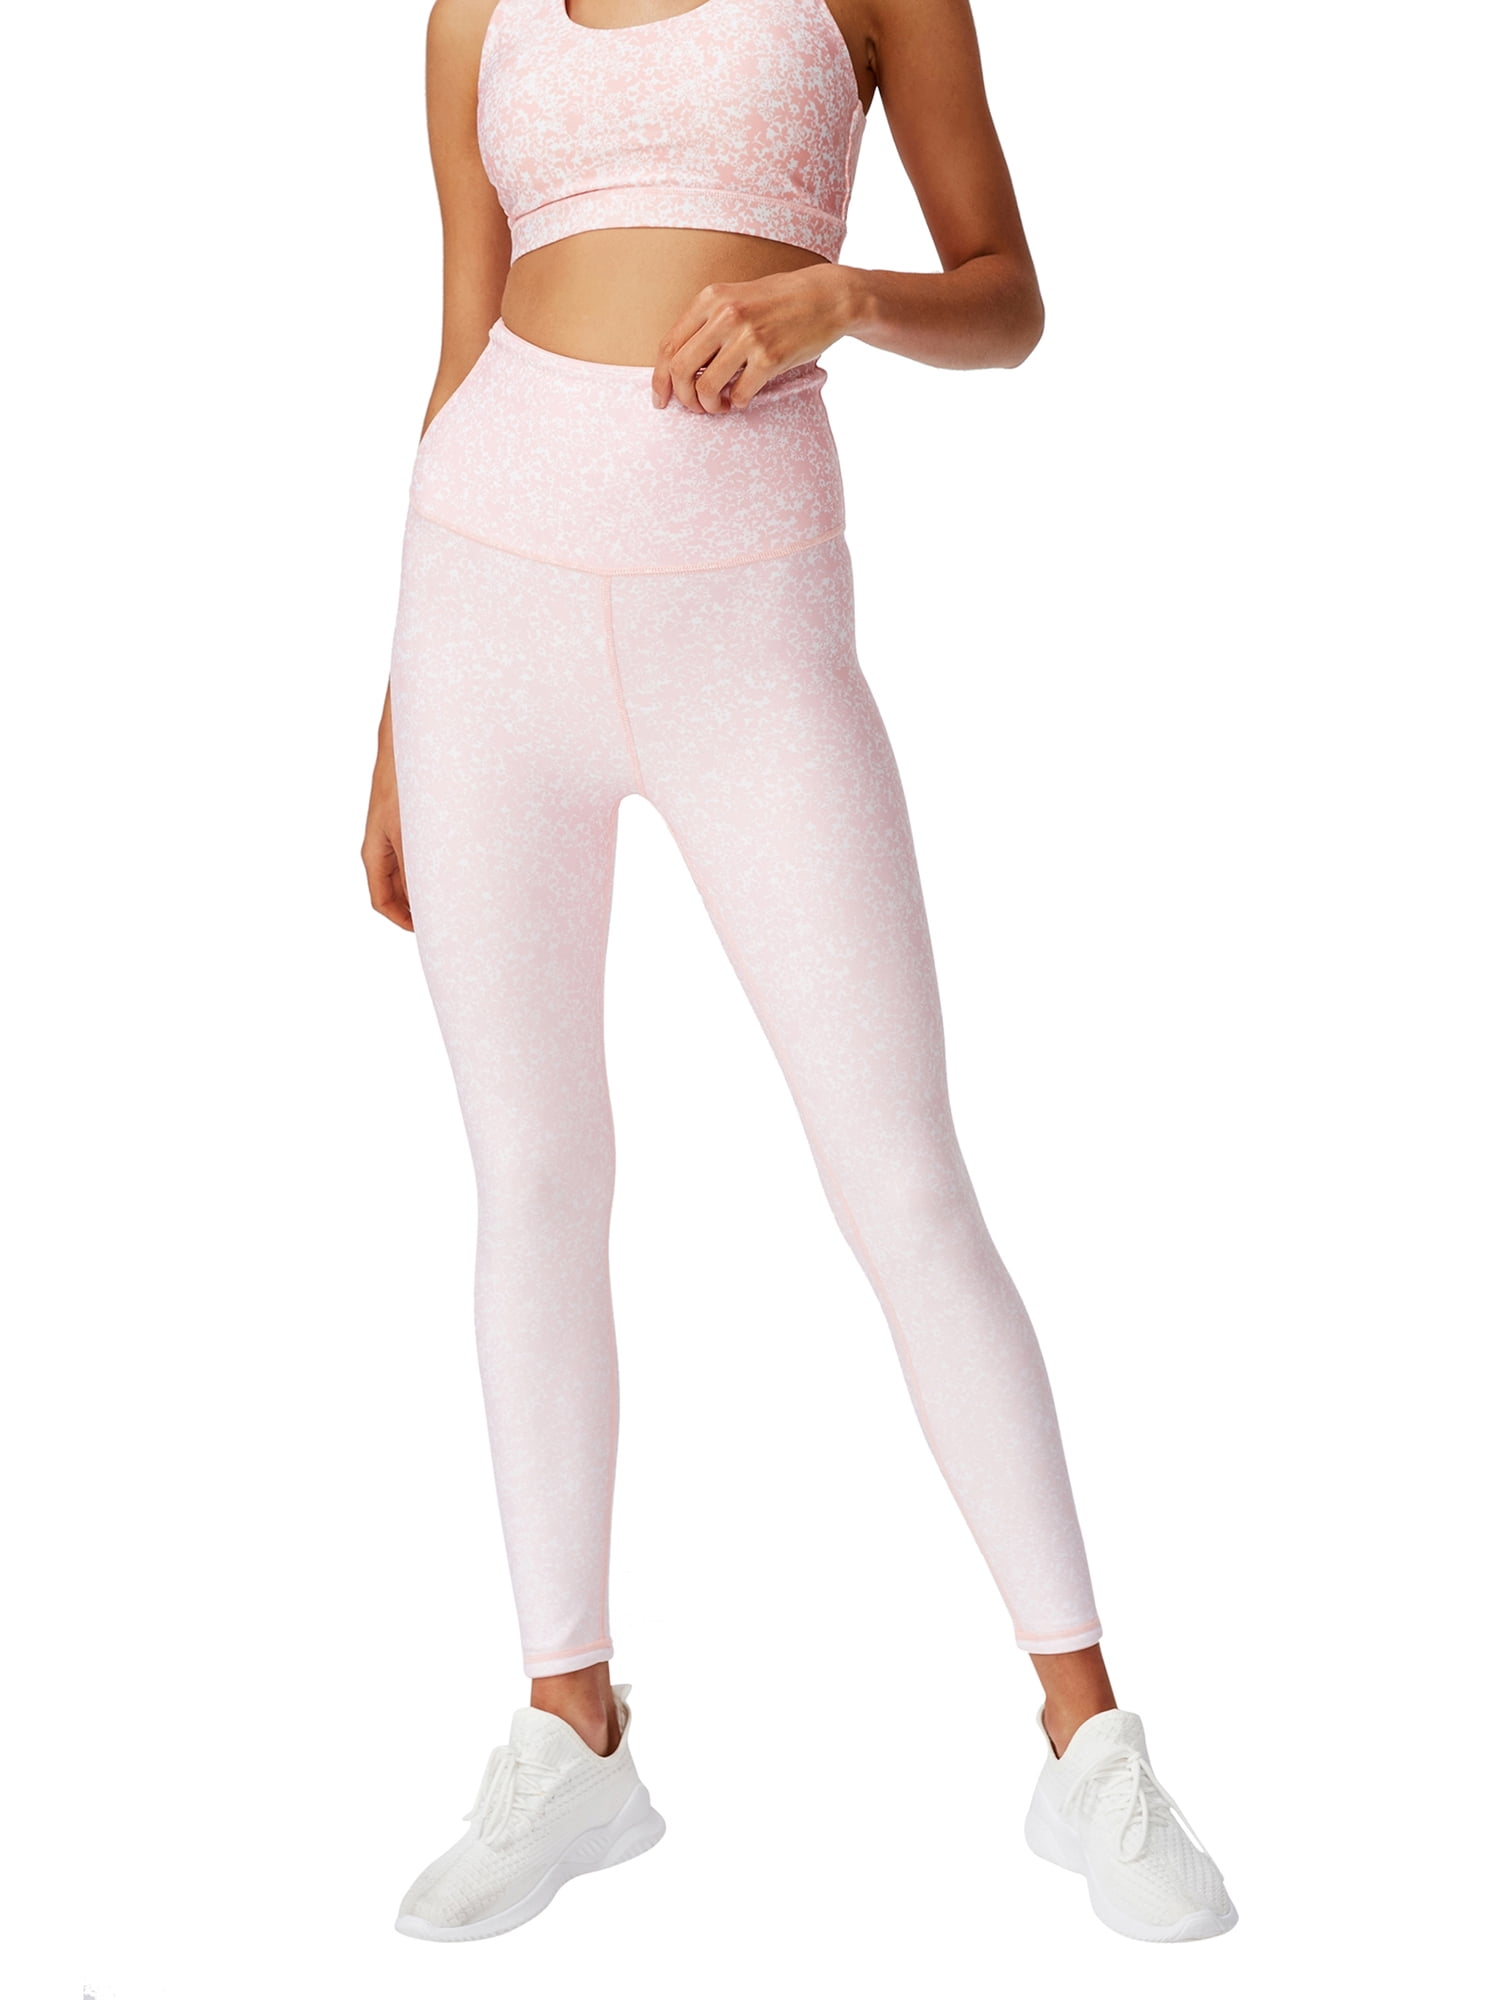 Cotton on Body Reversible 7/8 Tight 